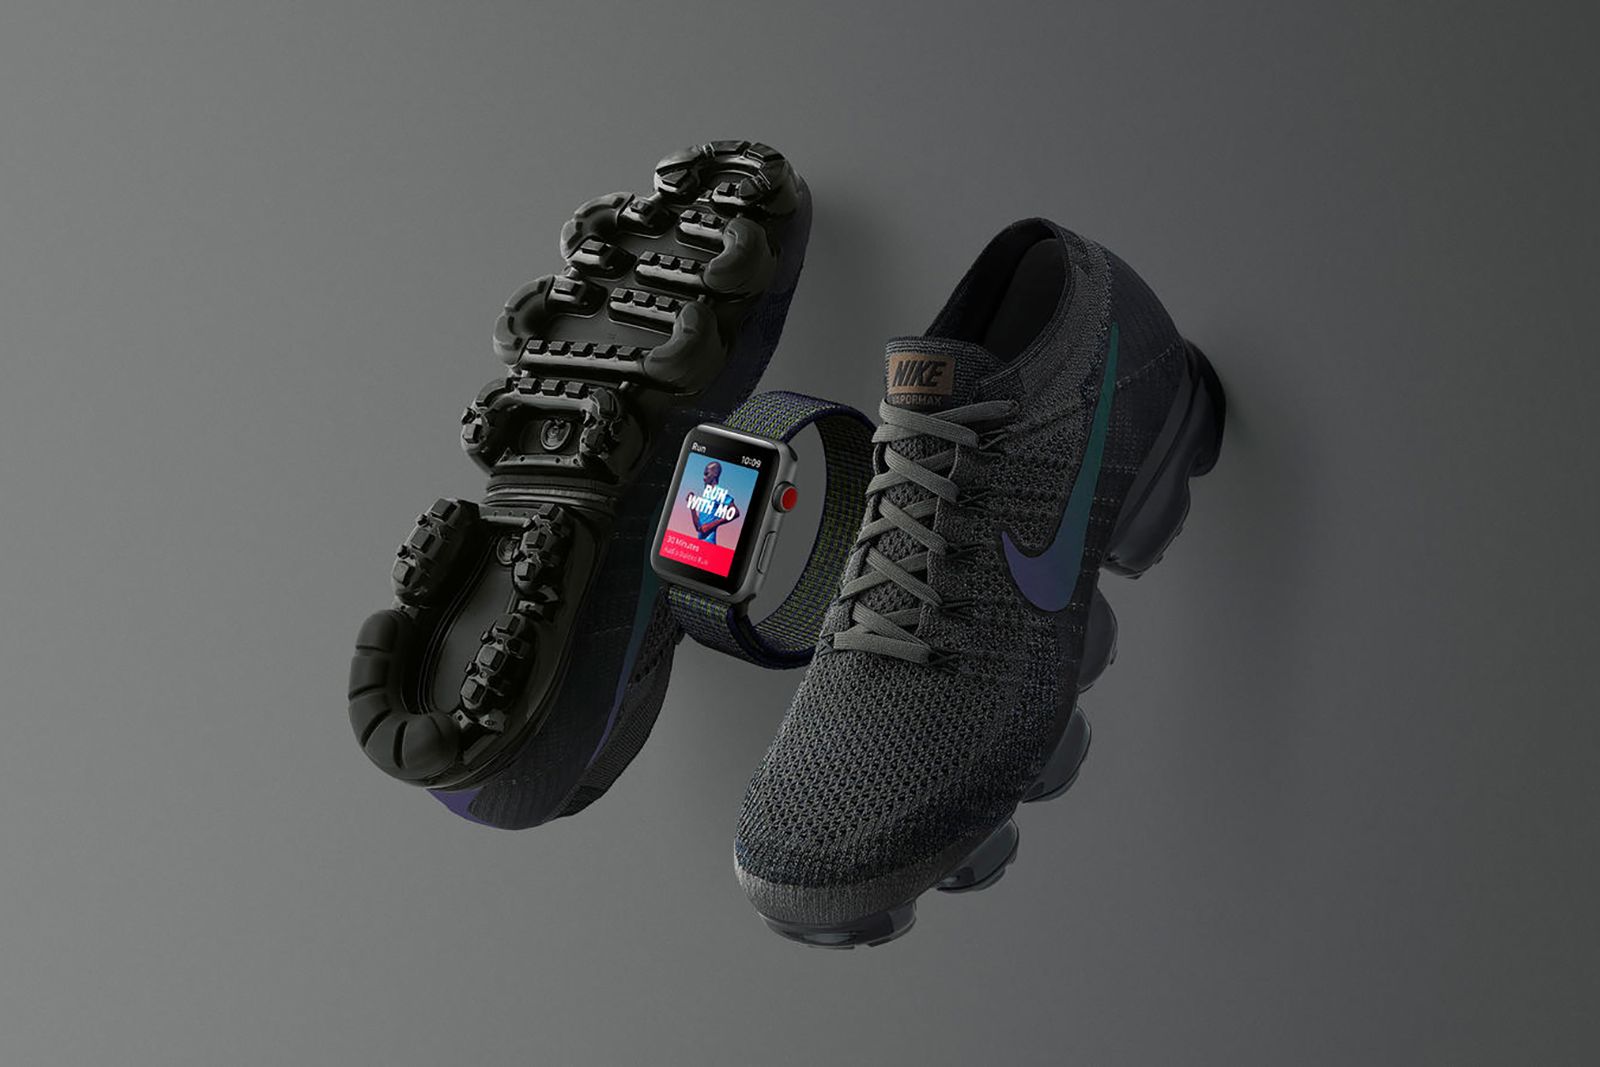 Nike unveils new Midnight Fog Apple Watch alongside matching trainers image 1